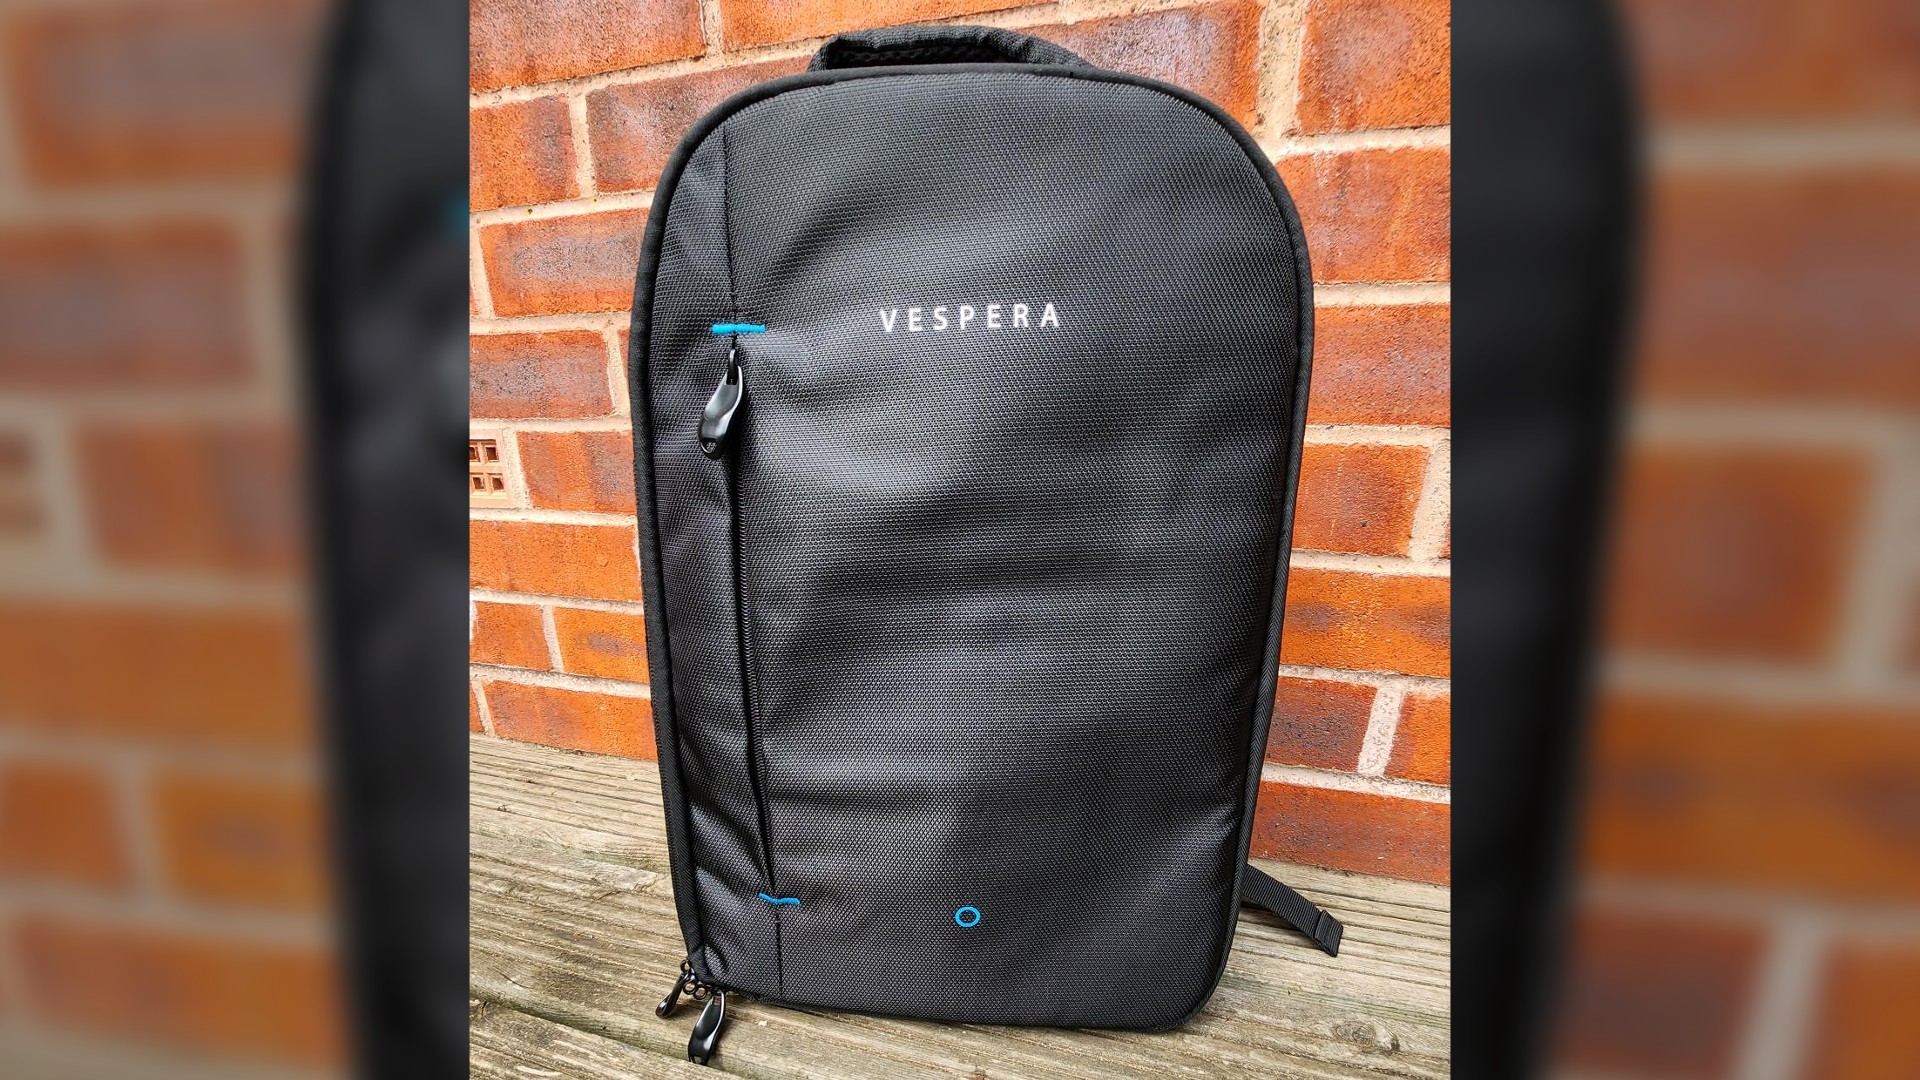 A sleek black backpack that contains the Vaonis Vespera Observation Station. There is a main zipper all the way around. There is a secondary pocket at the front, with Vespera written on it in white text. There is a black handle on the top.